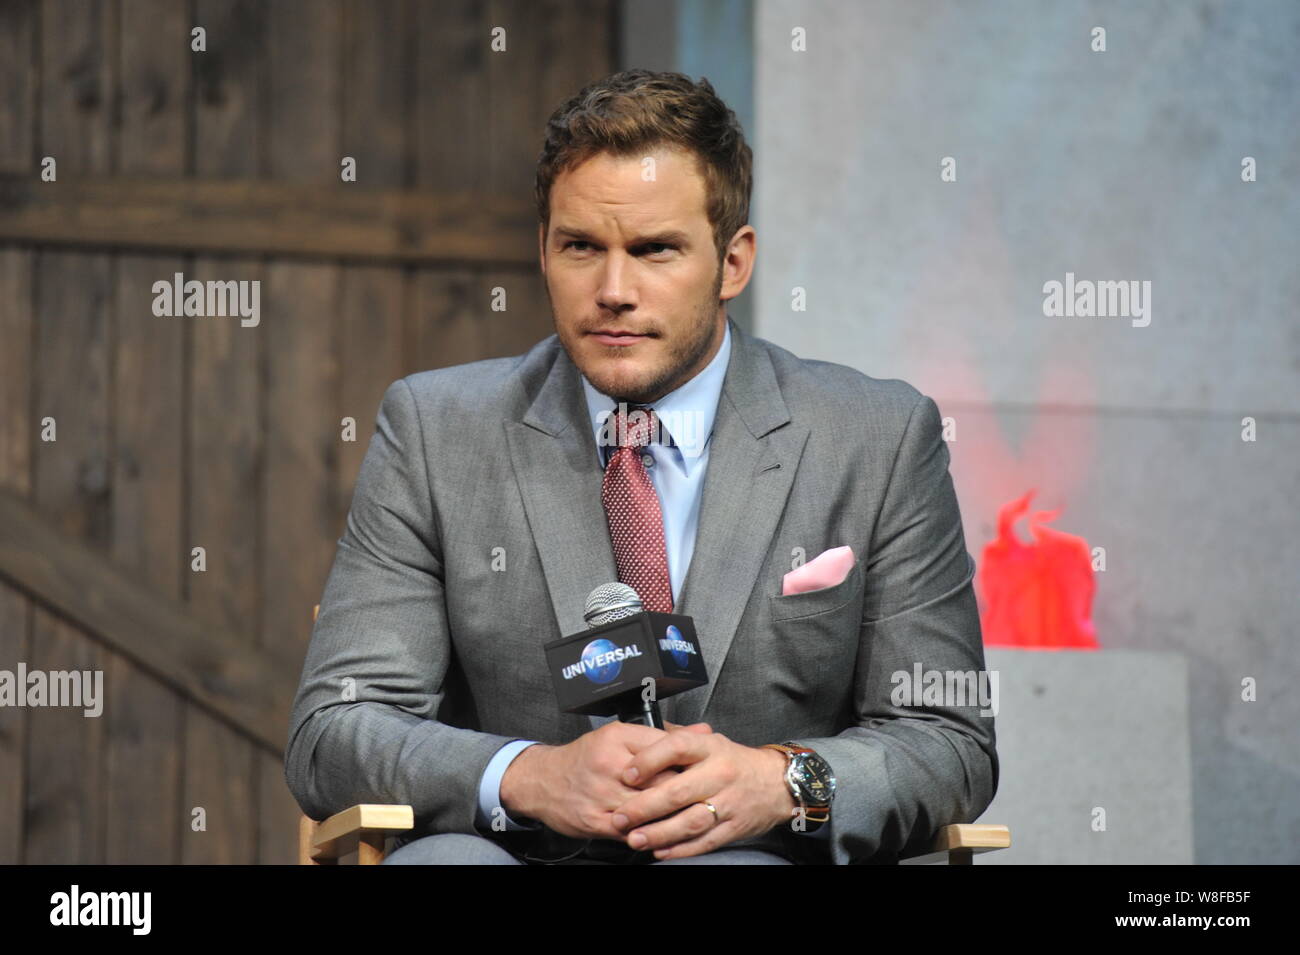 American actor Chris Pratt attends a press conference for his movie 'Jurassic World' in Beijing, China, 26 May 2015. Stock Photo